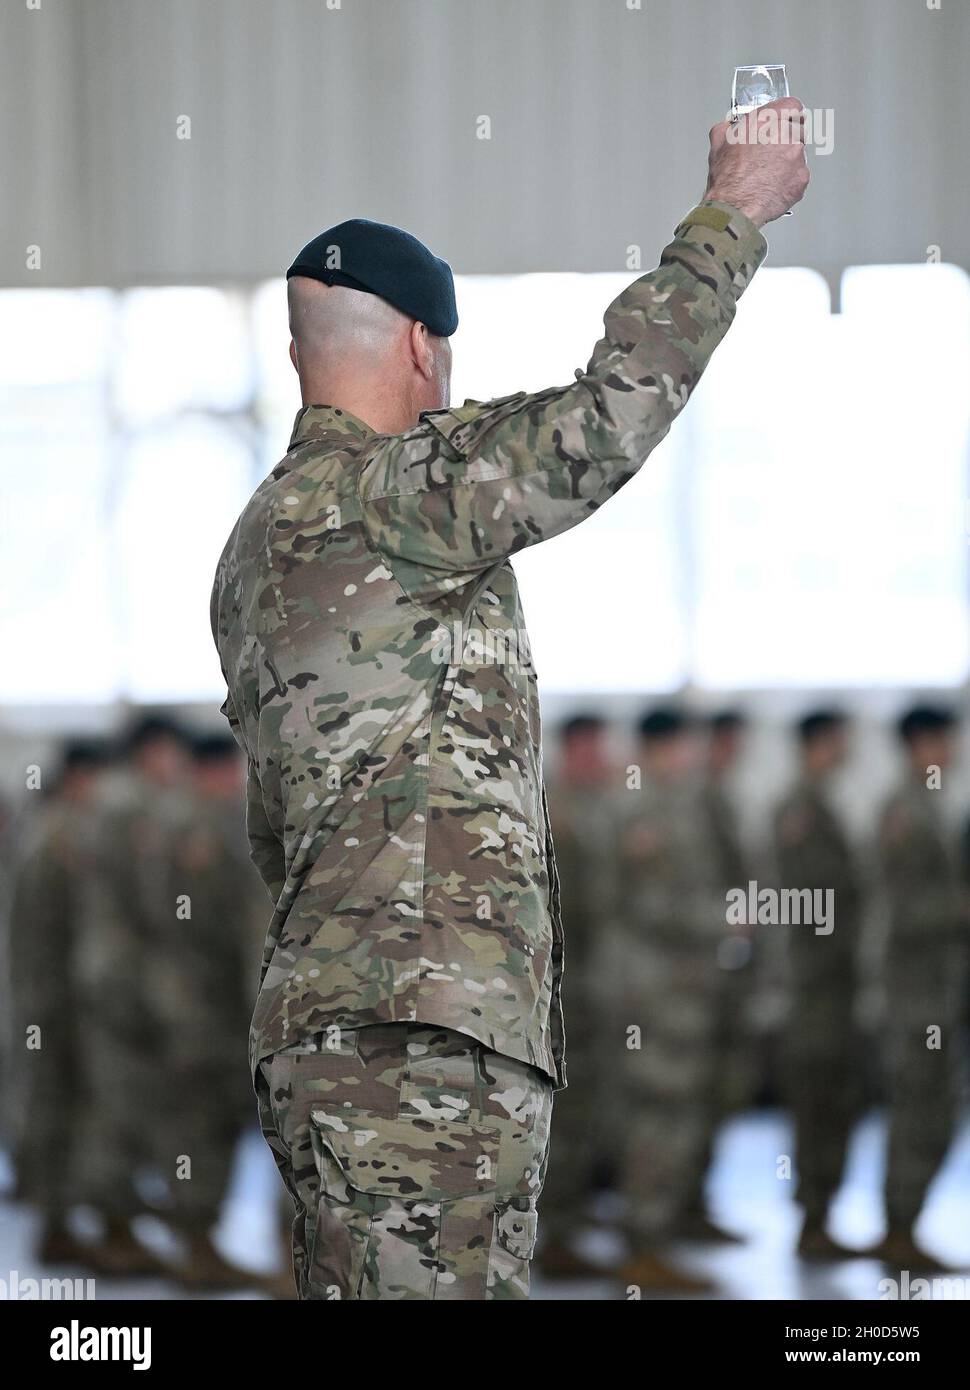 Lieutenant Colonel Patrick Toohey, commander, 4th Battalion, 1st Special Warfare Training Group (Airborne) toasts the Special Forces Regiment during a graduation ceremony at Fort Bragg, North Carolina January 28, 2021. The ceremony marked the completion of the Special Forces Qualification Course where Soldiers earned the honor of wearing the green beret, the official headgear of Special Forces. Stock Photo